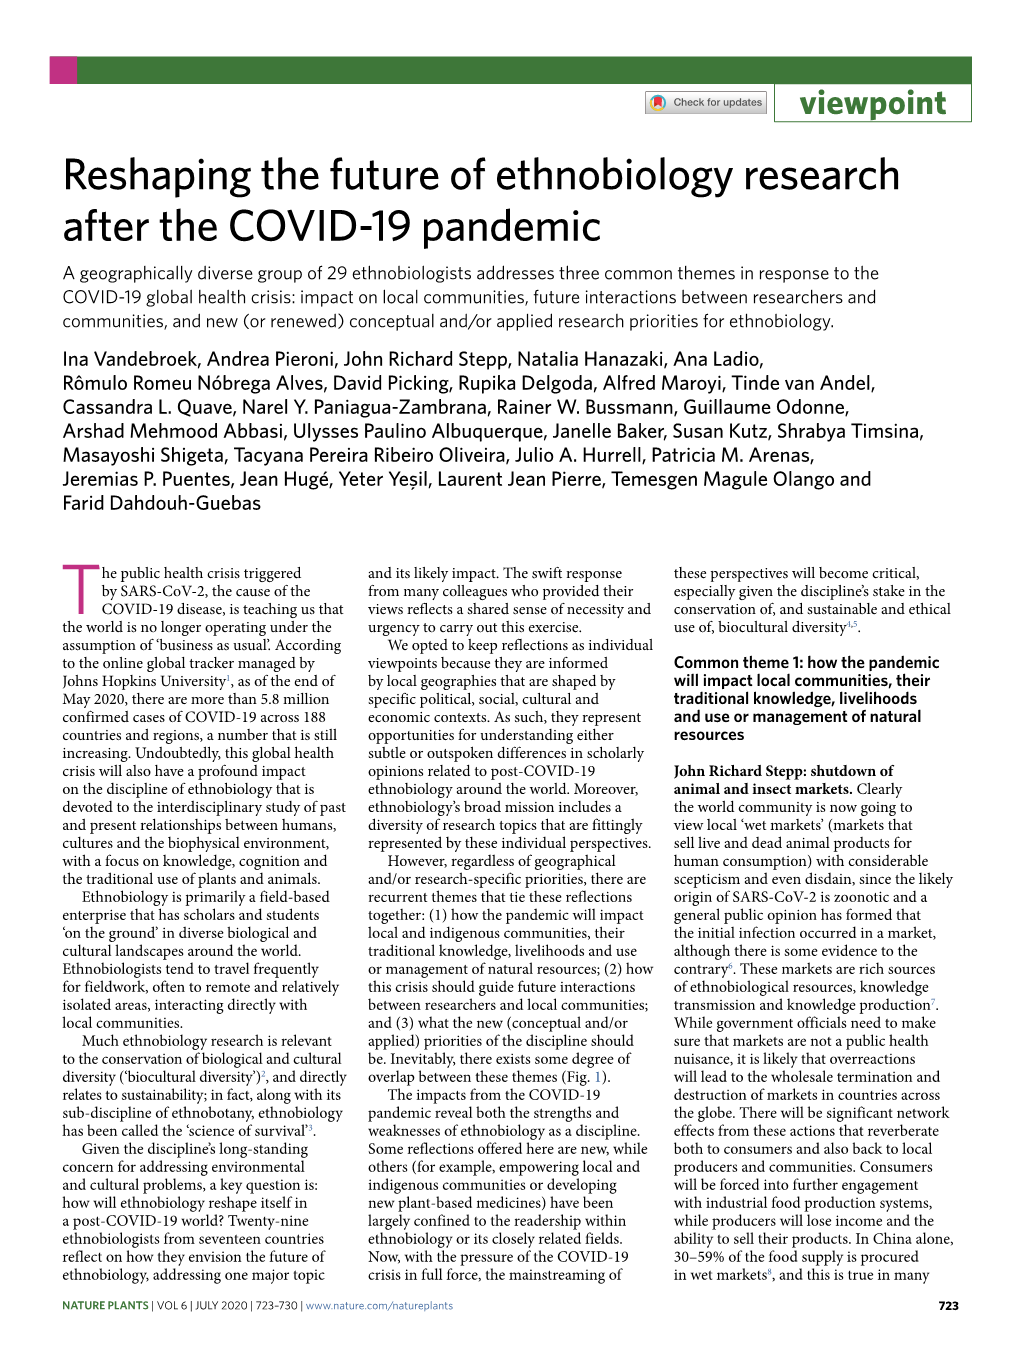 Reshaping the Future of Ethnobiology Research After the COVID-19 Pandemic